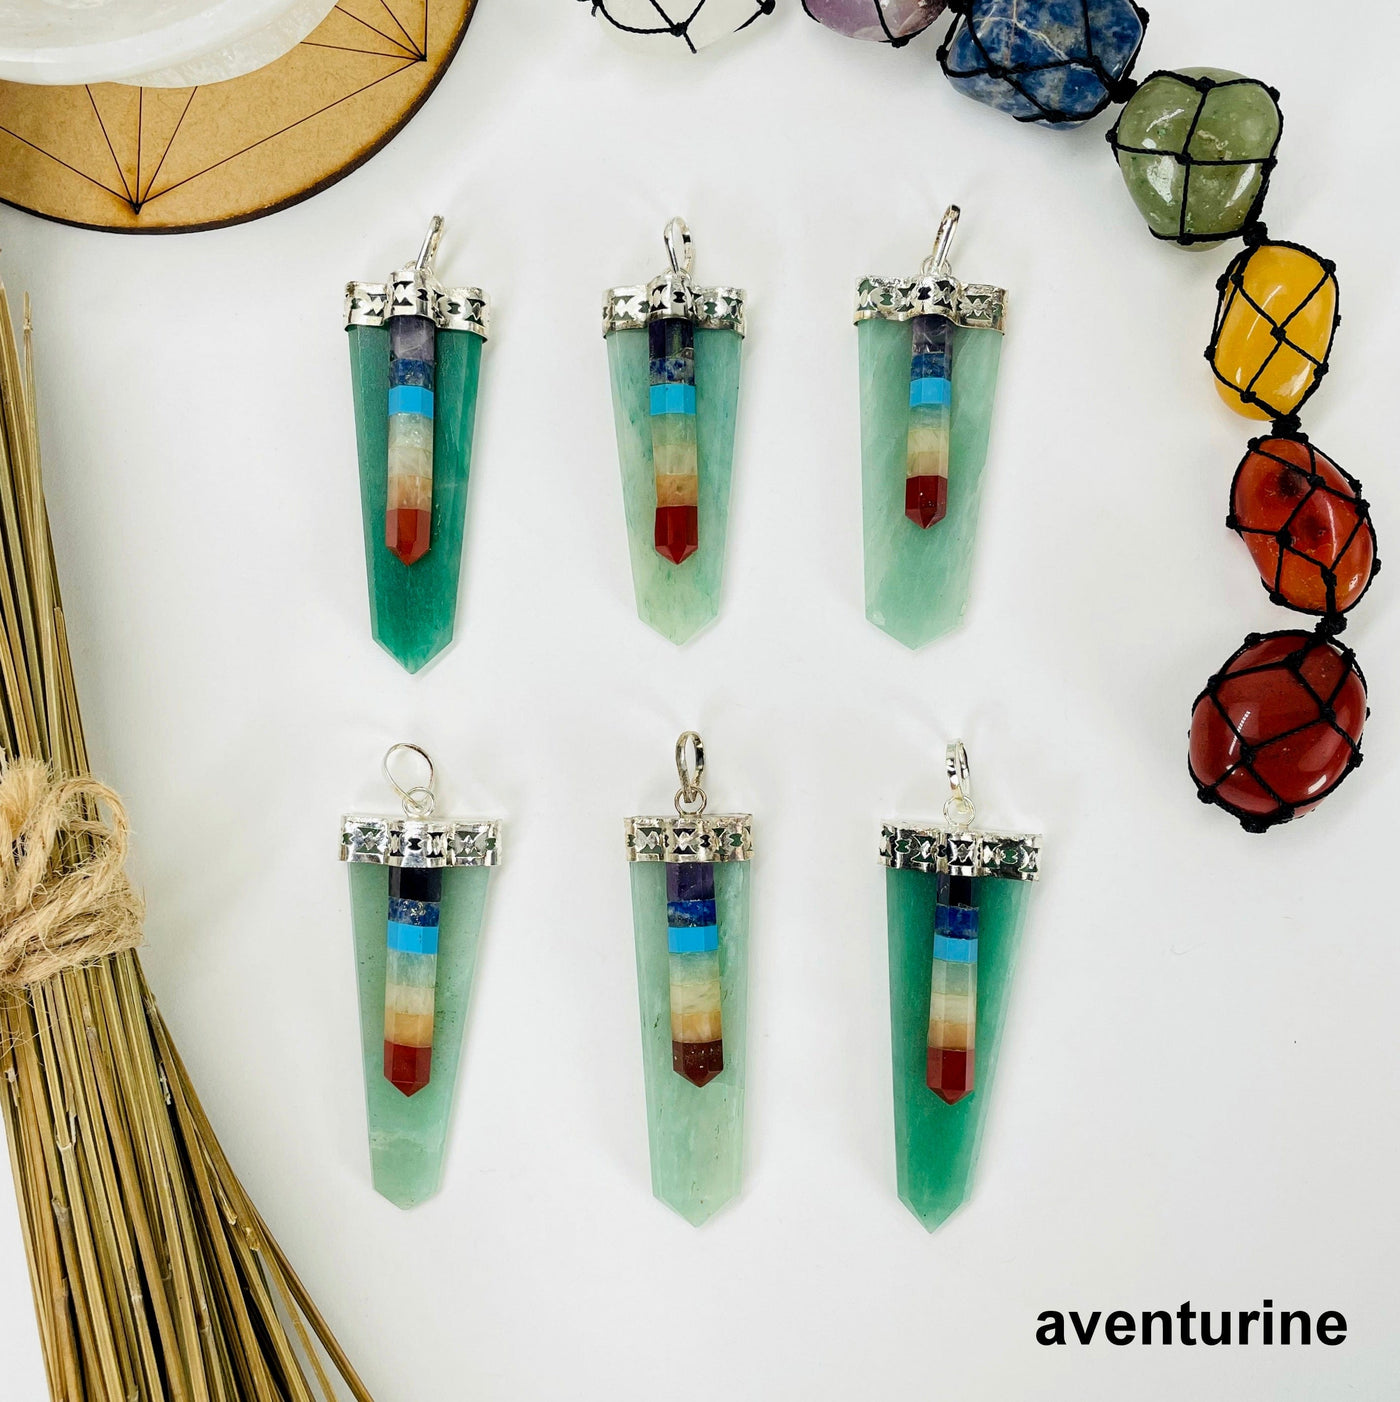 overhead view of six aventurine polished point pendants with chakra point accents on white background with decorations for possible variations